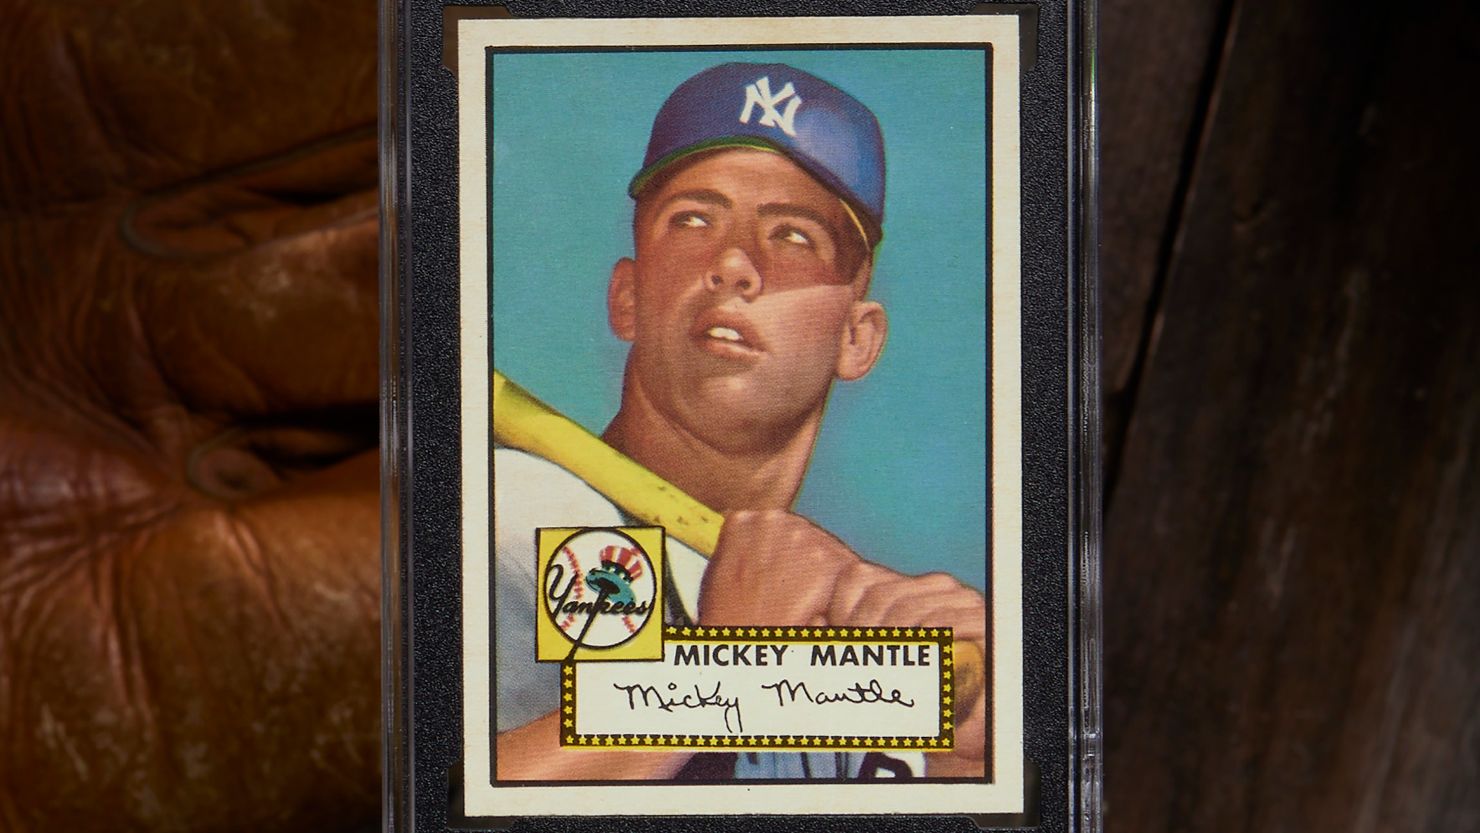 The most expensive baseball card in history just sold for $12.6 million